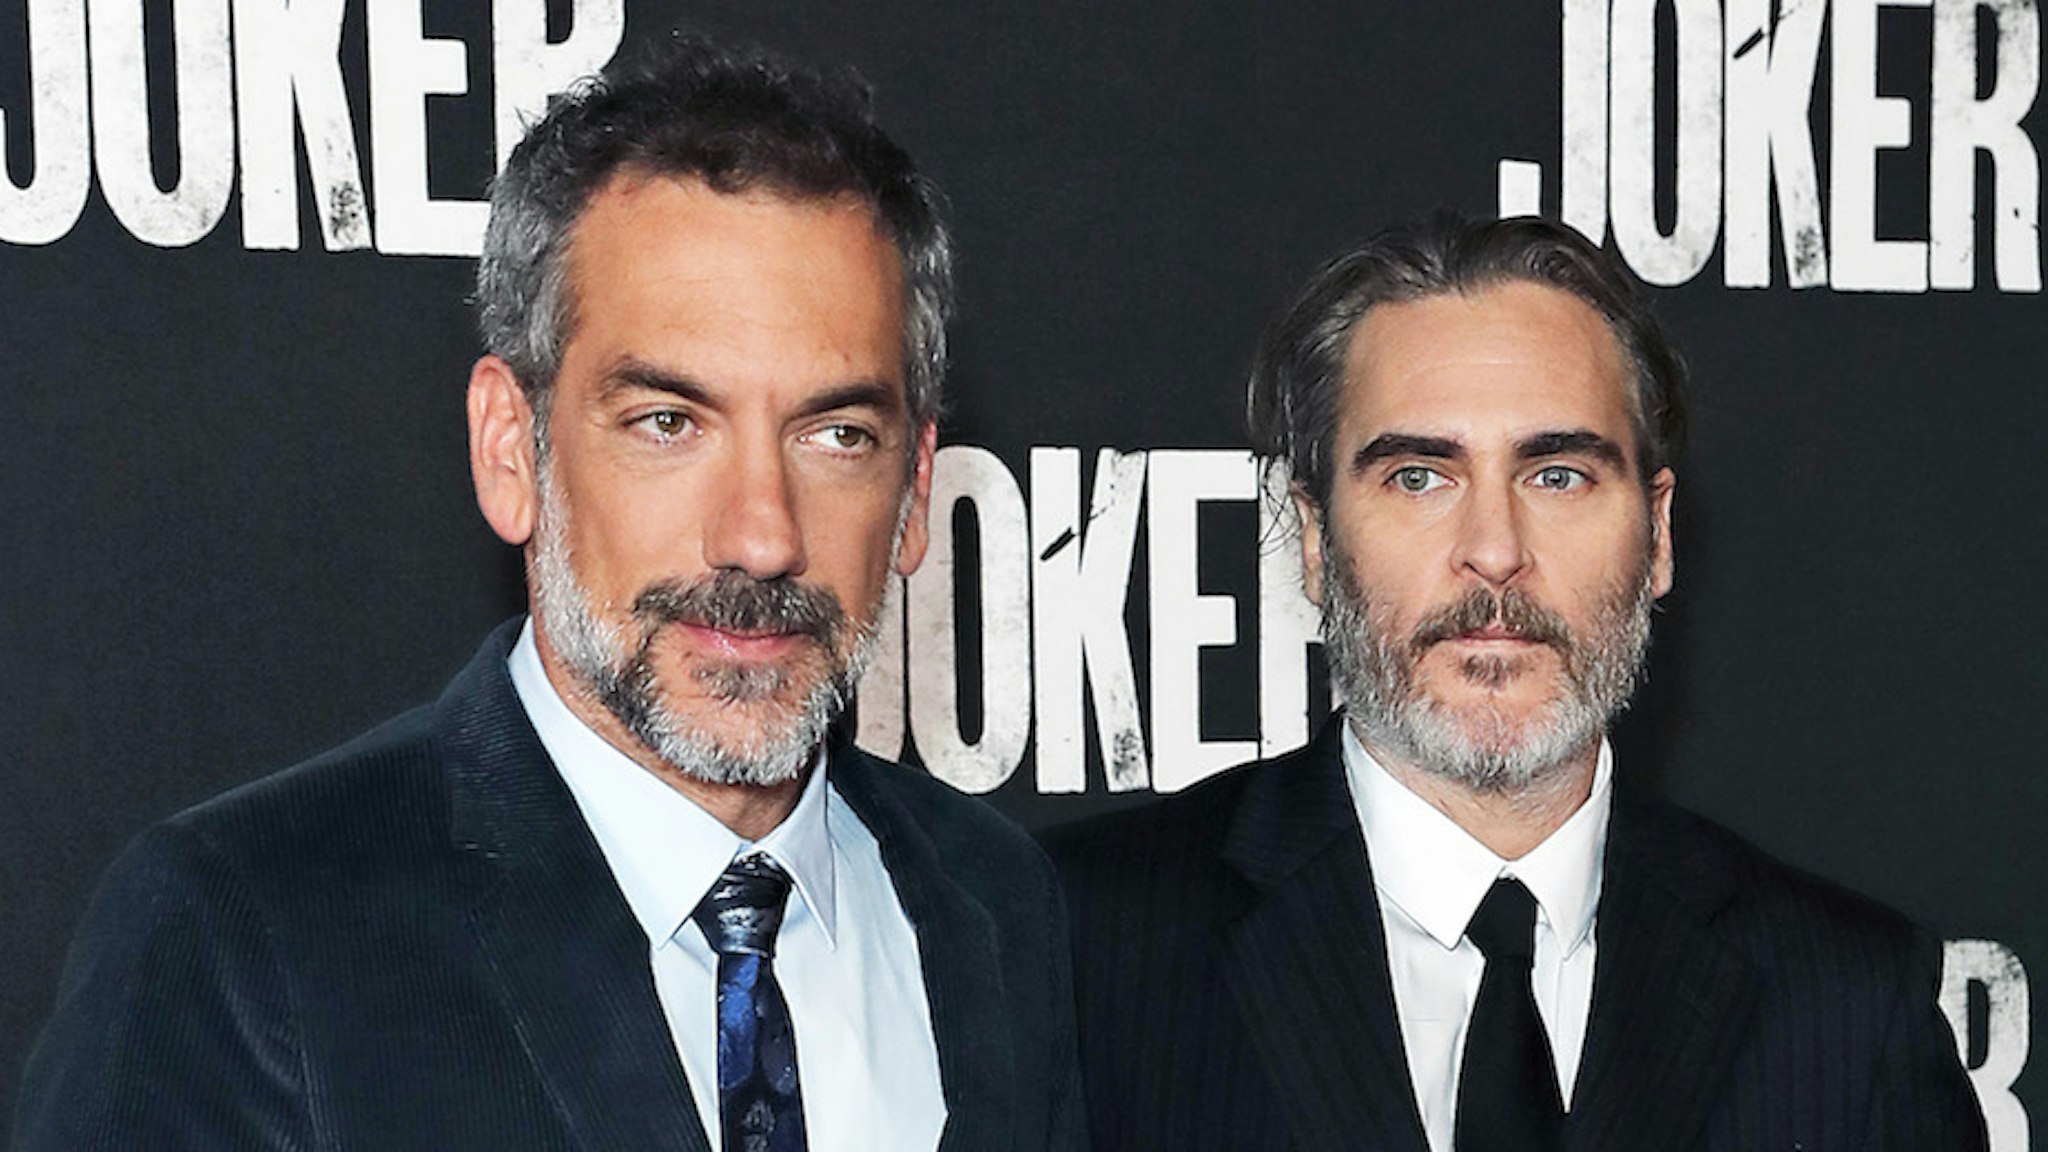 LONDON, ENGLAND - SEPTEMBER 25: Todd Phillips (L) and Joaquin Phoenix attend a special screening of "Joker" at Cineworld Leicester Square on September 25, 2019 in London, England. (Photo by David M. Benett/Dave Benett/WireImage )